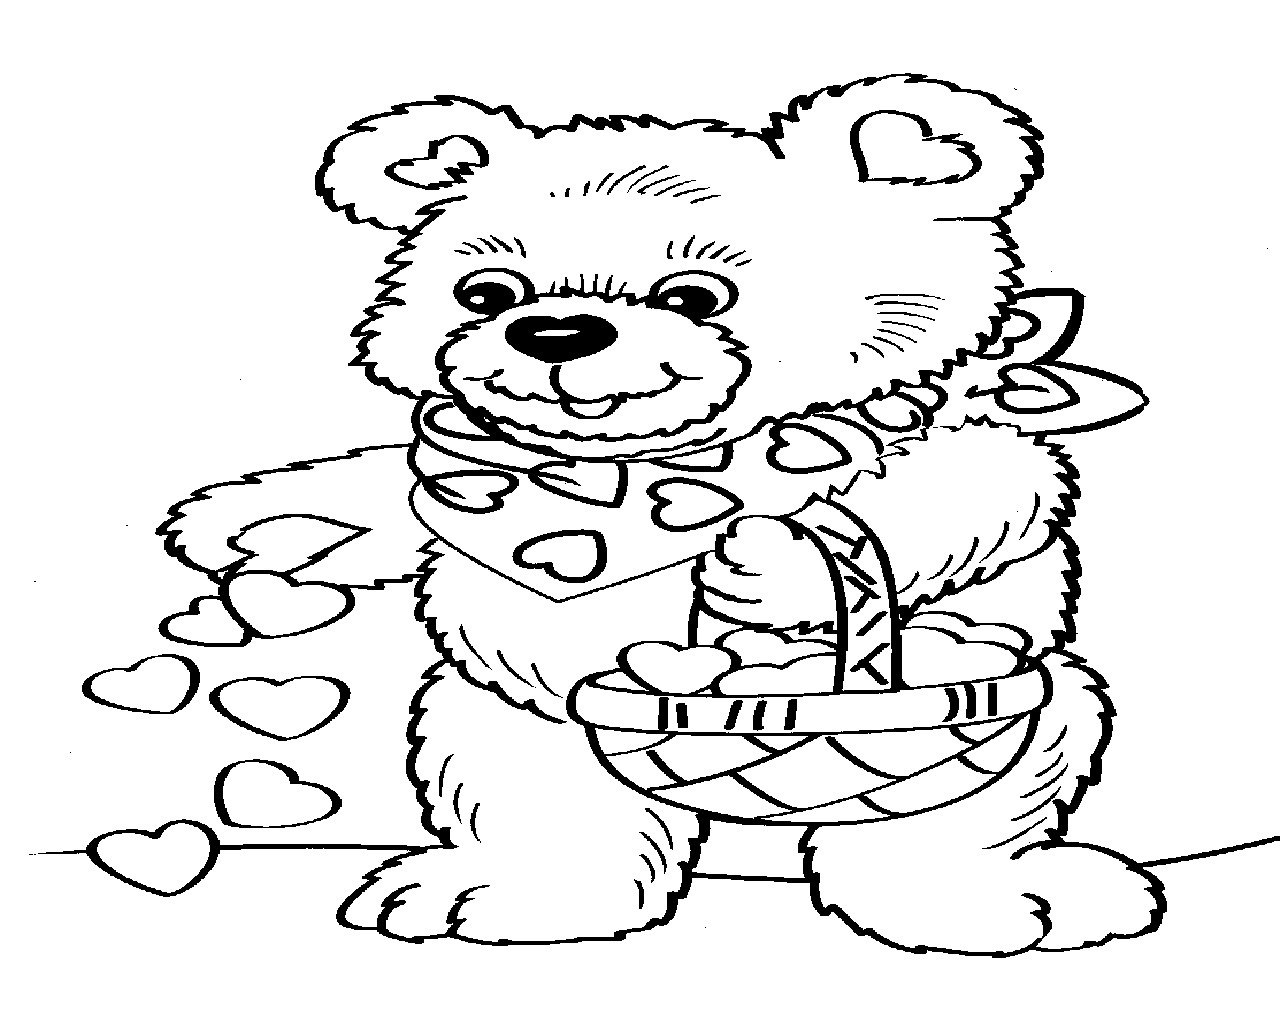 Free Coloring Pages For Preschoolers And Kids Image 26 ...